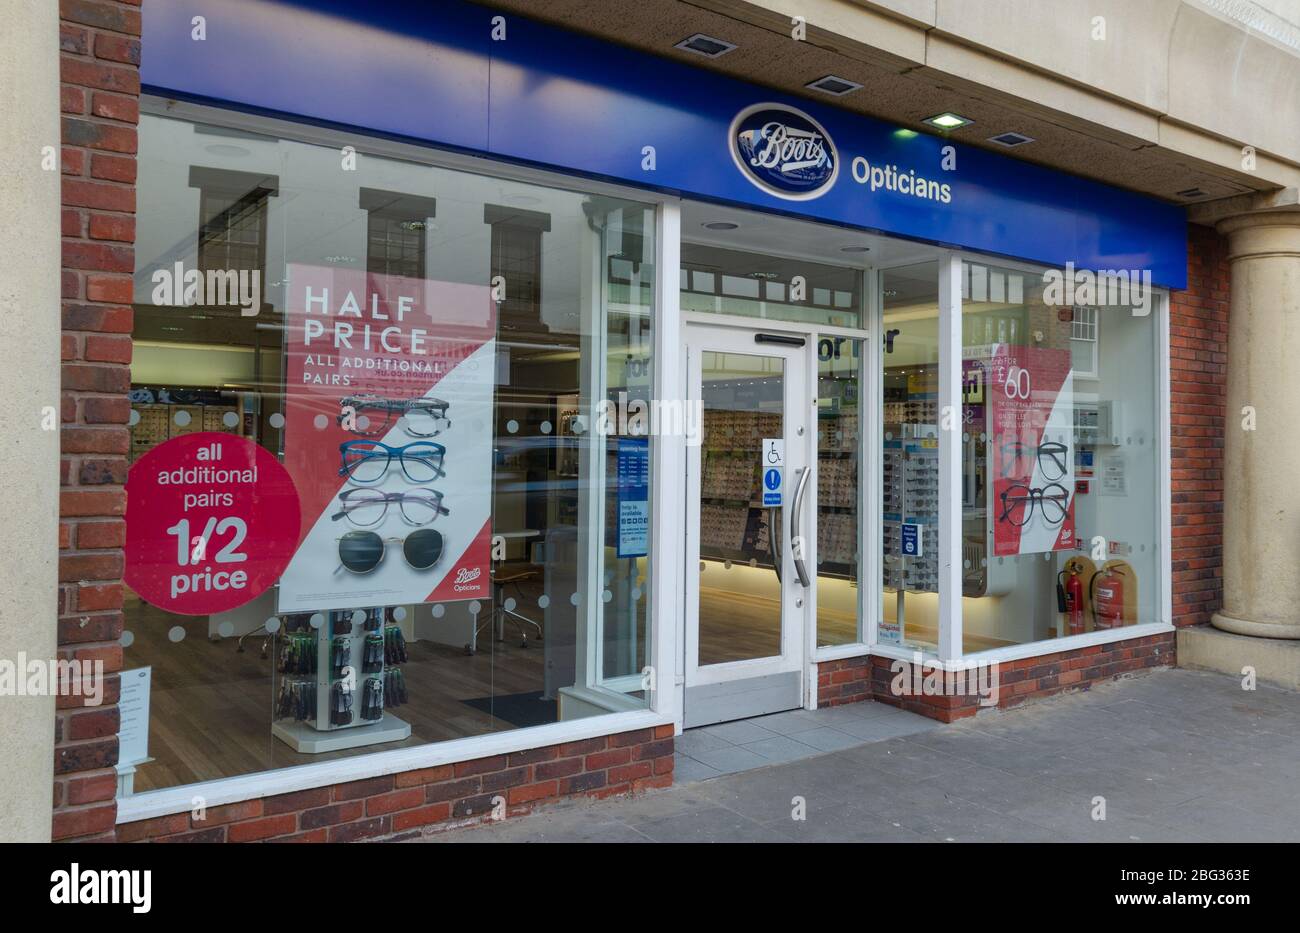 Chester, UK: Mar 1, 2020: Half price promotion is underway at the Frodsham Street branch of Boots Opticians Stock Photo